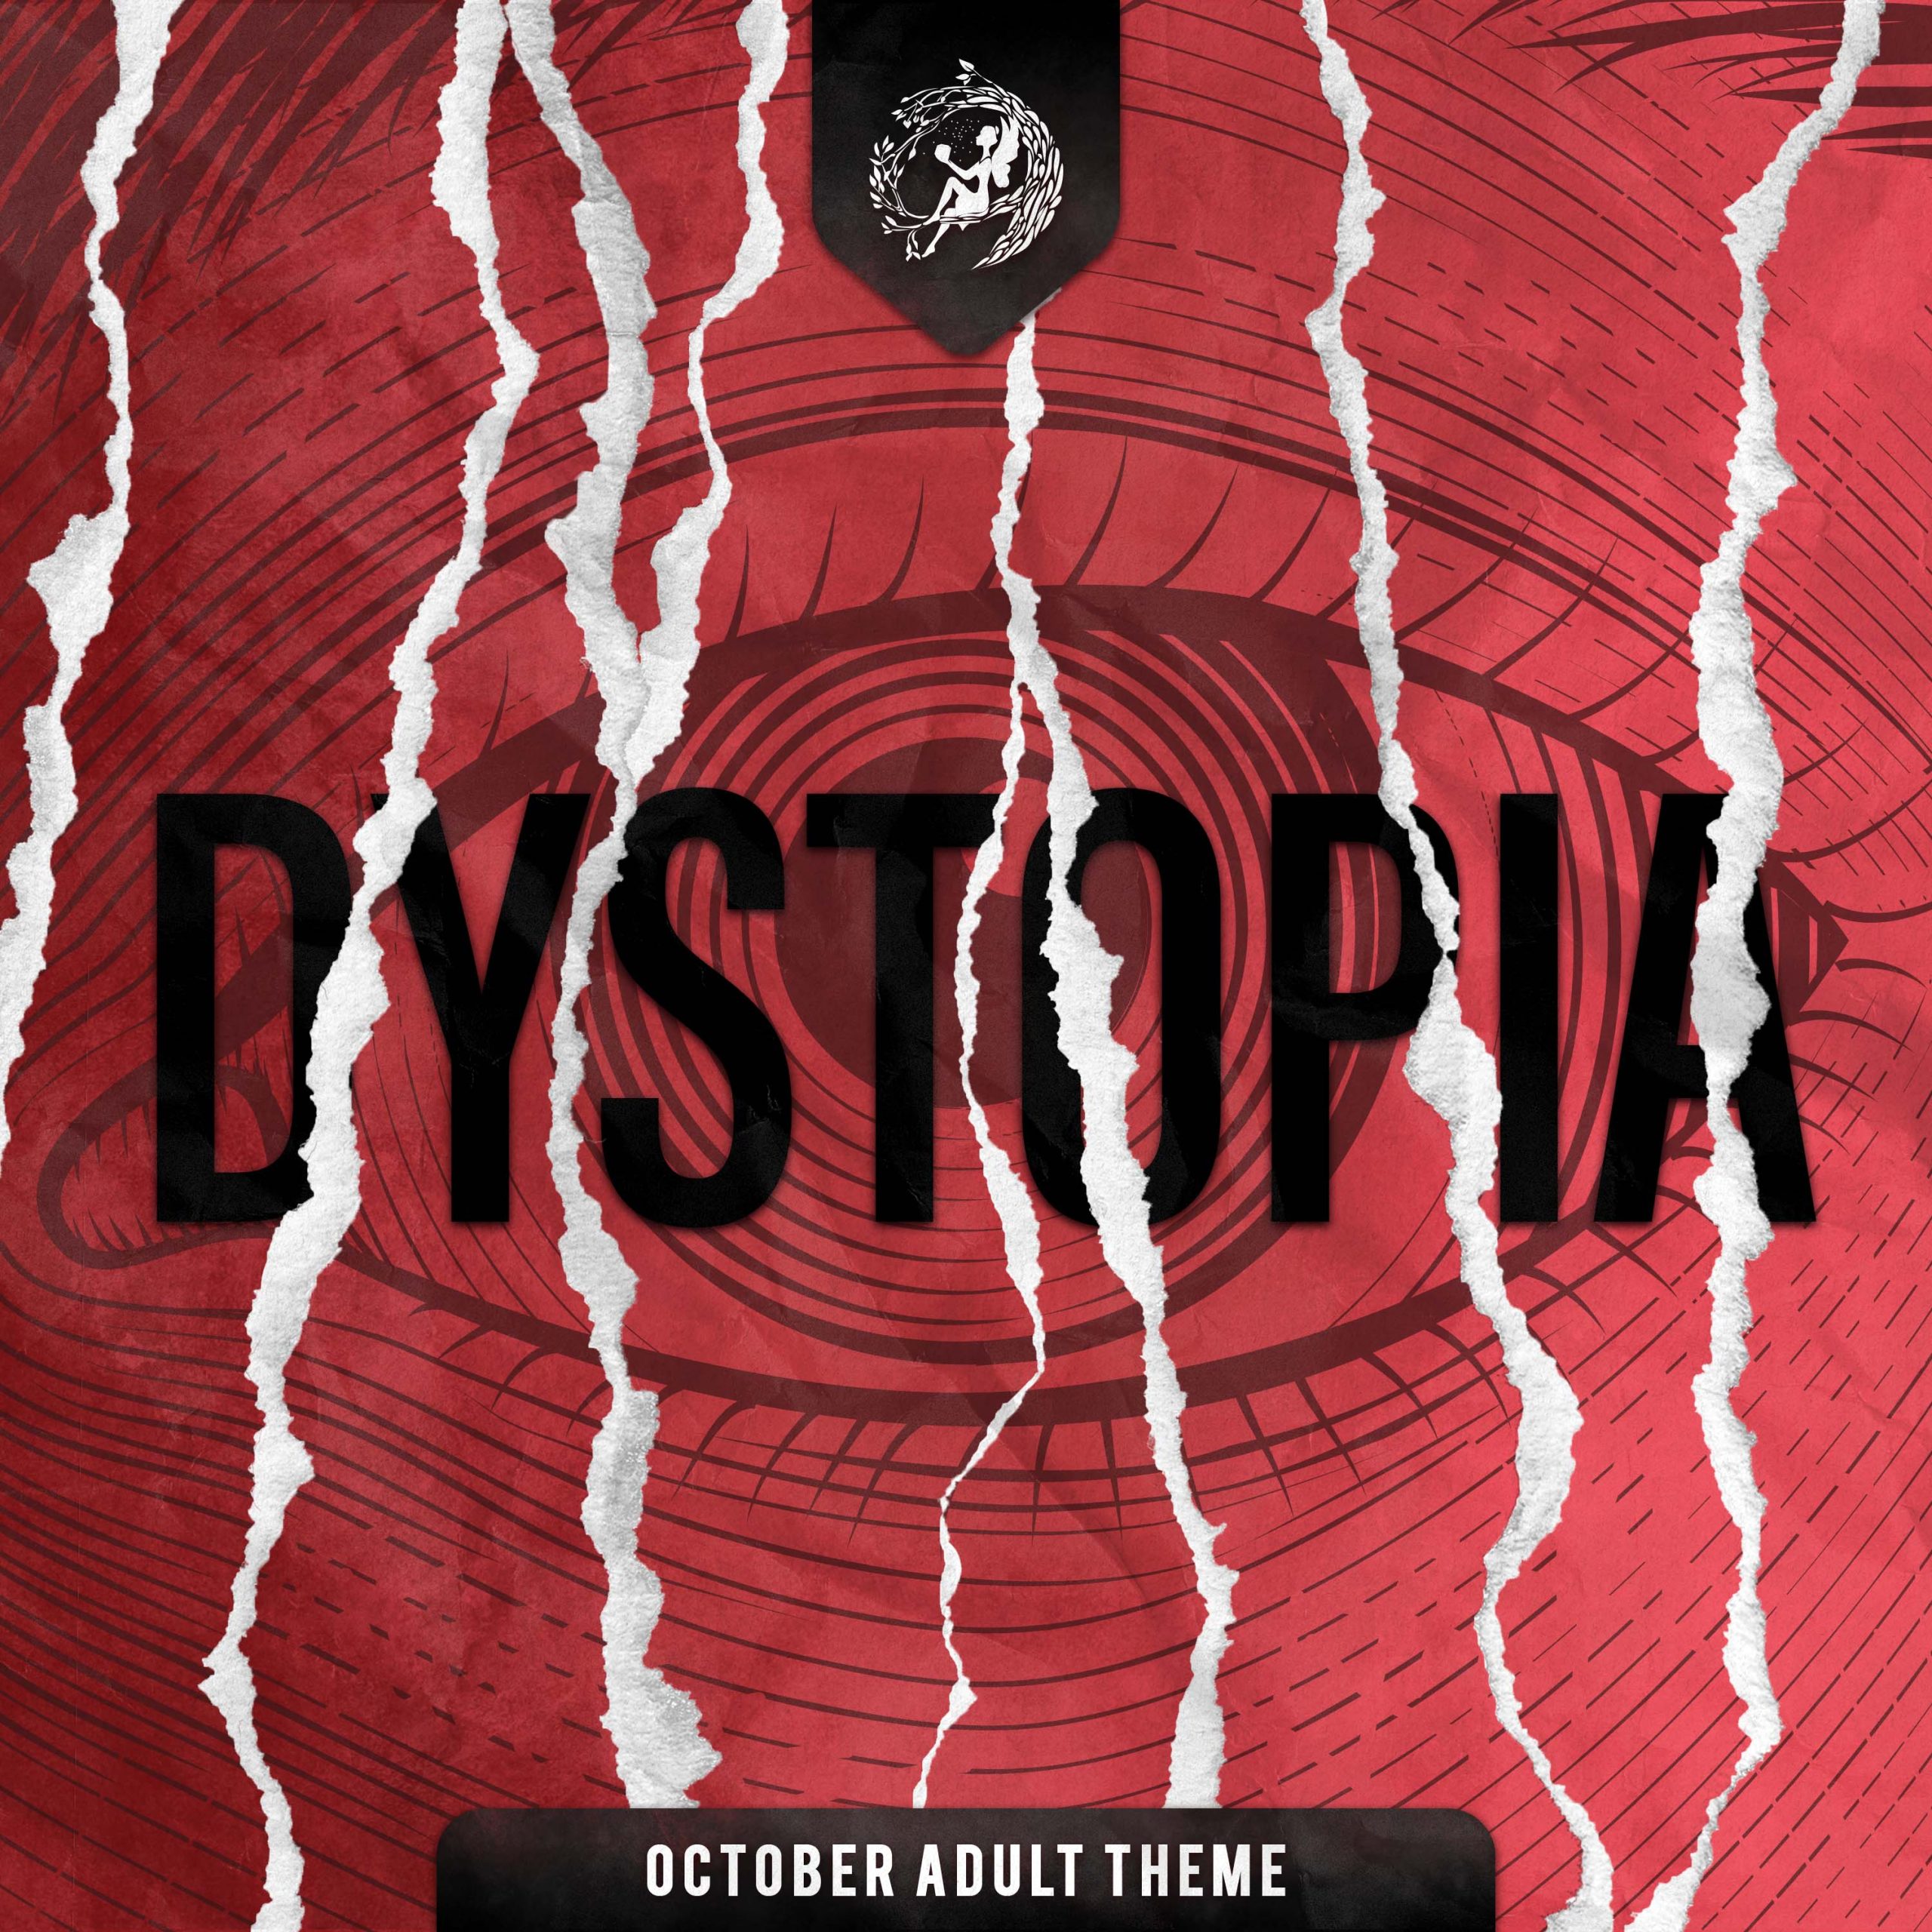 October Adult Theme: DYSTOPIA